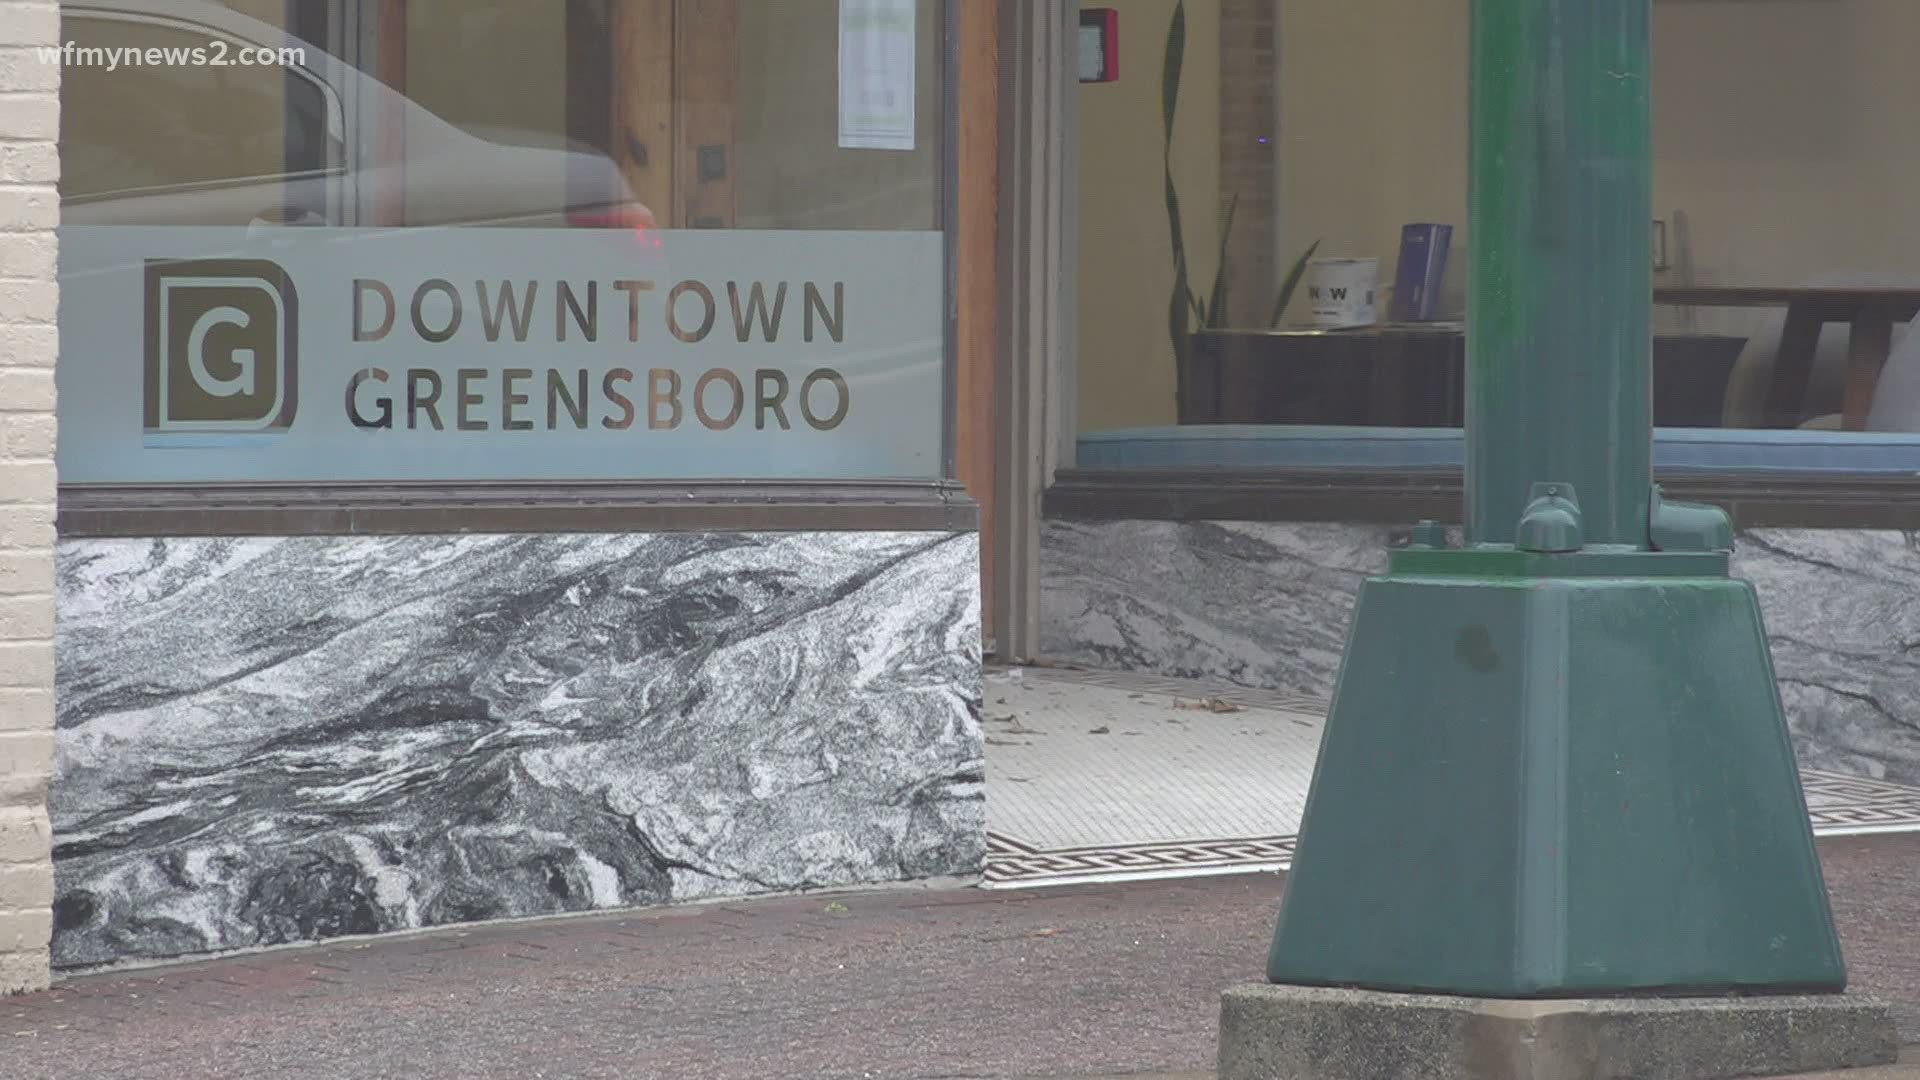 A Greensboro skate shop is the first business to win a downtown Greensboro contest. The contest is a creative way to get residents to shop local